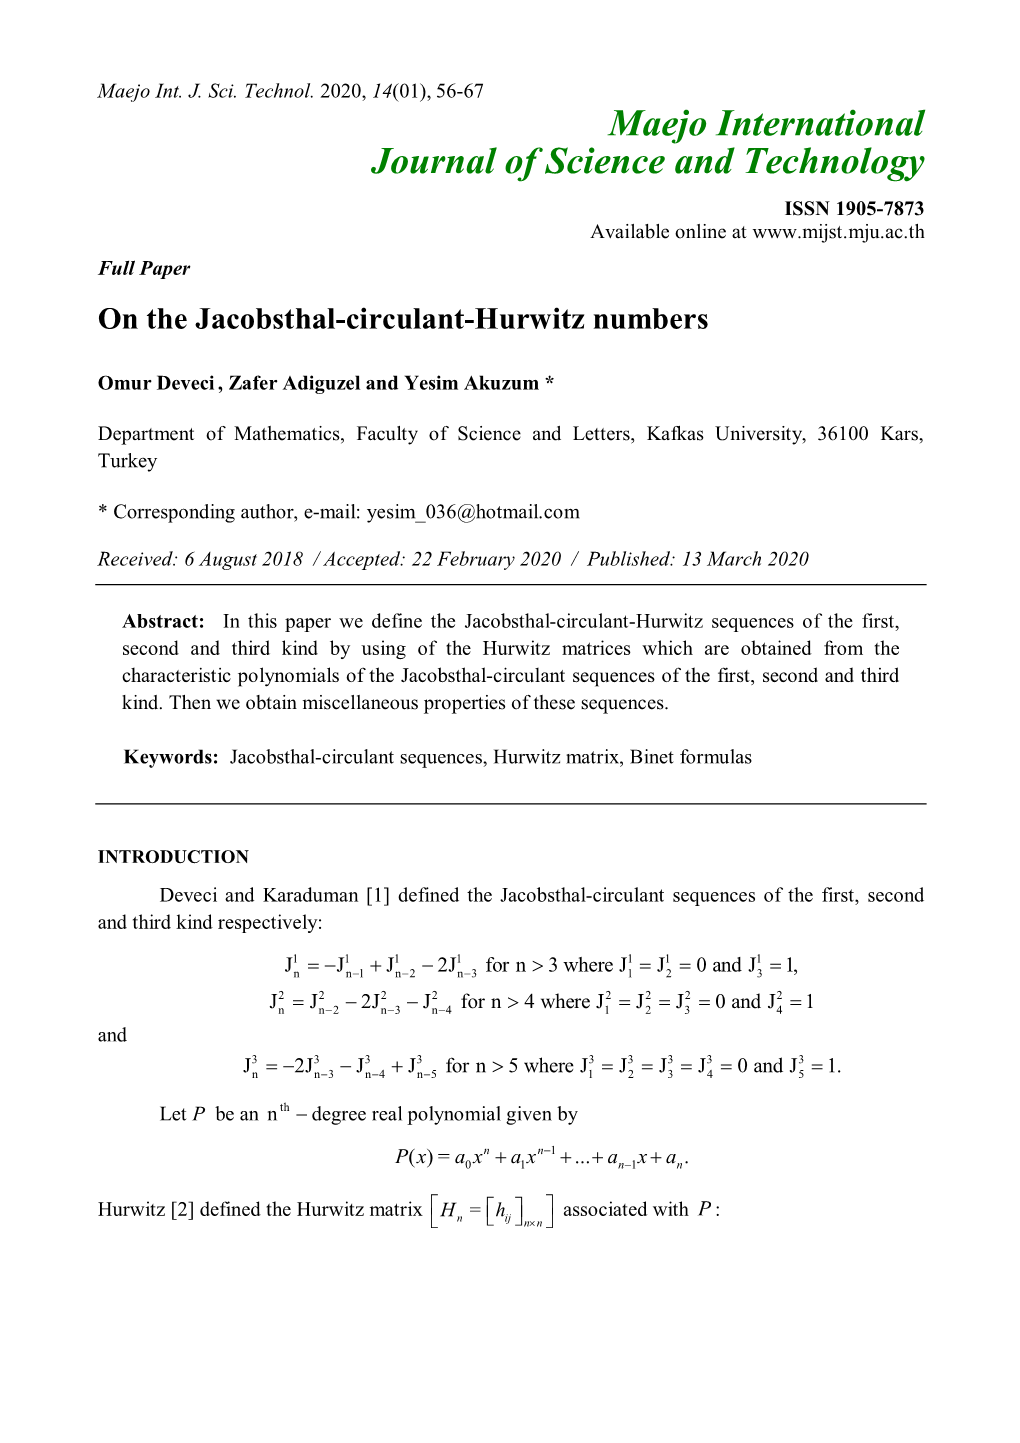 On the Jacobsthal-Circulant-Hurwitz Numbers